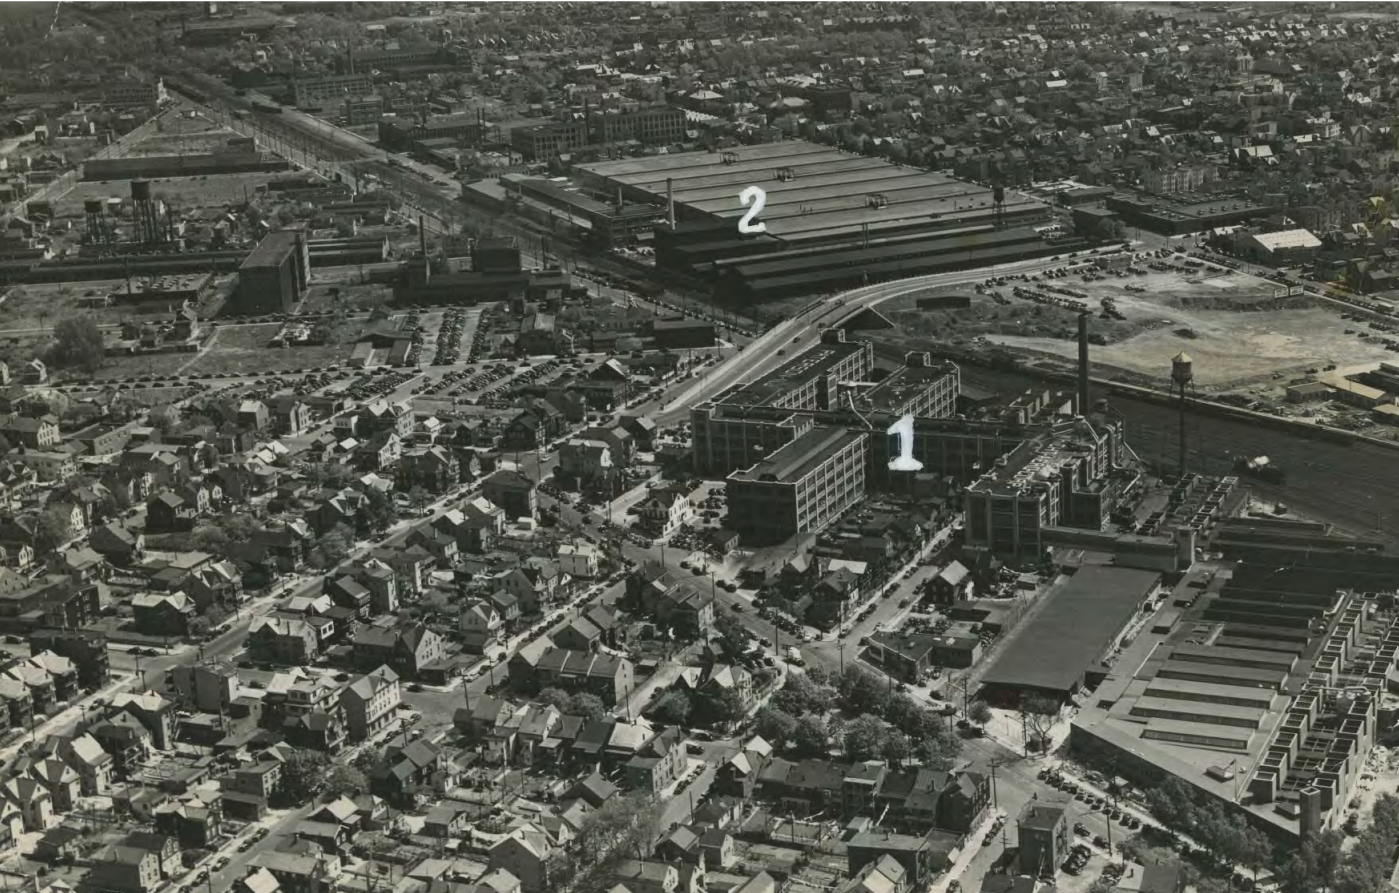 A 1940s aerial image of dense neighborhoods surrounding two massive manufacturing plants along a wide railroad line, numbered "1" & "2" for identification